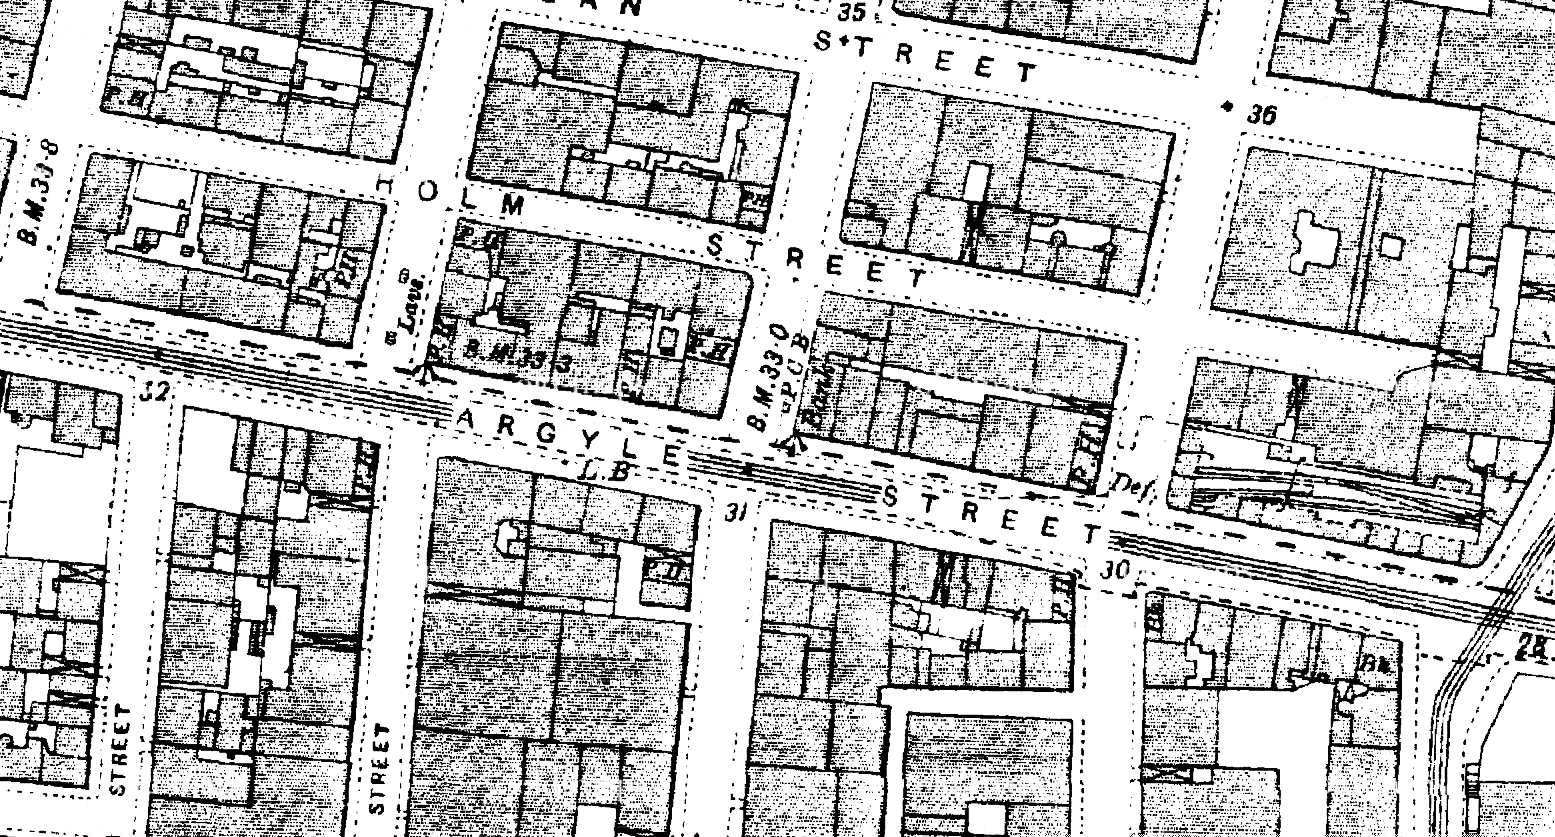 A4--West Campbell Street at Argyle Street--1934 (Mk 2) OS map extract 1-2500 scale.png